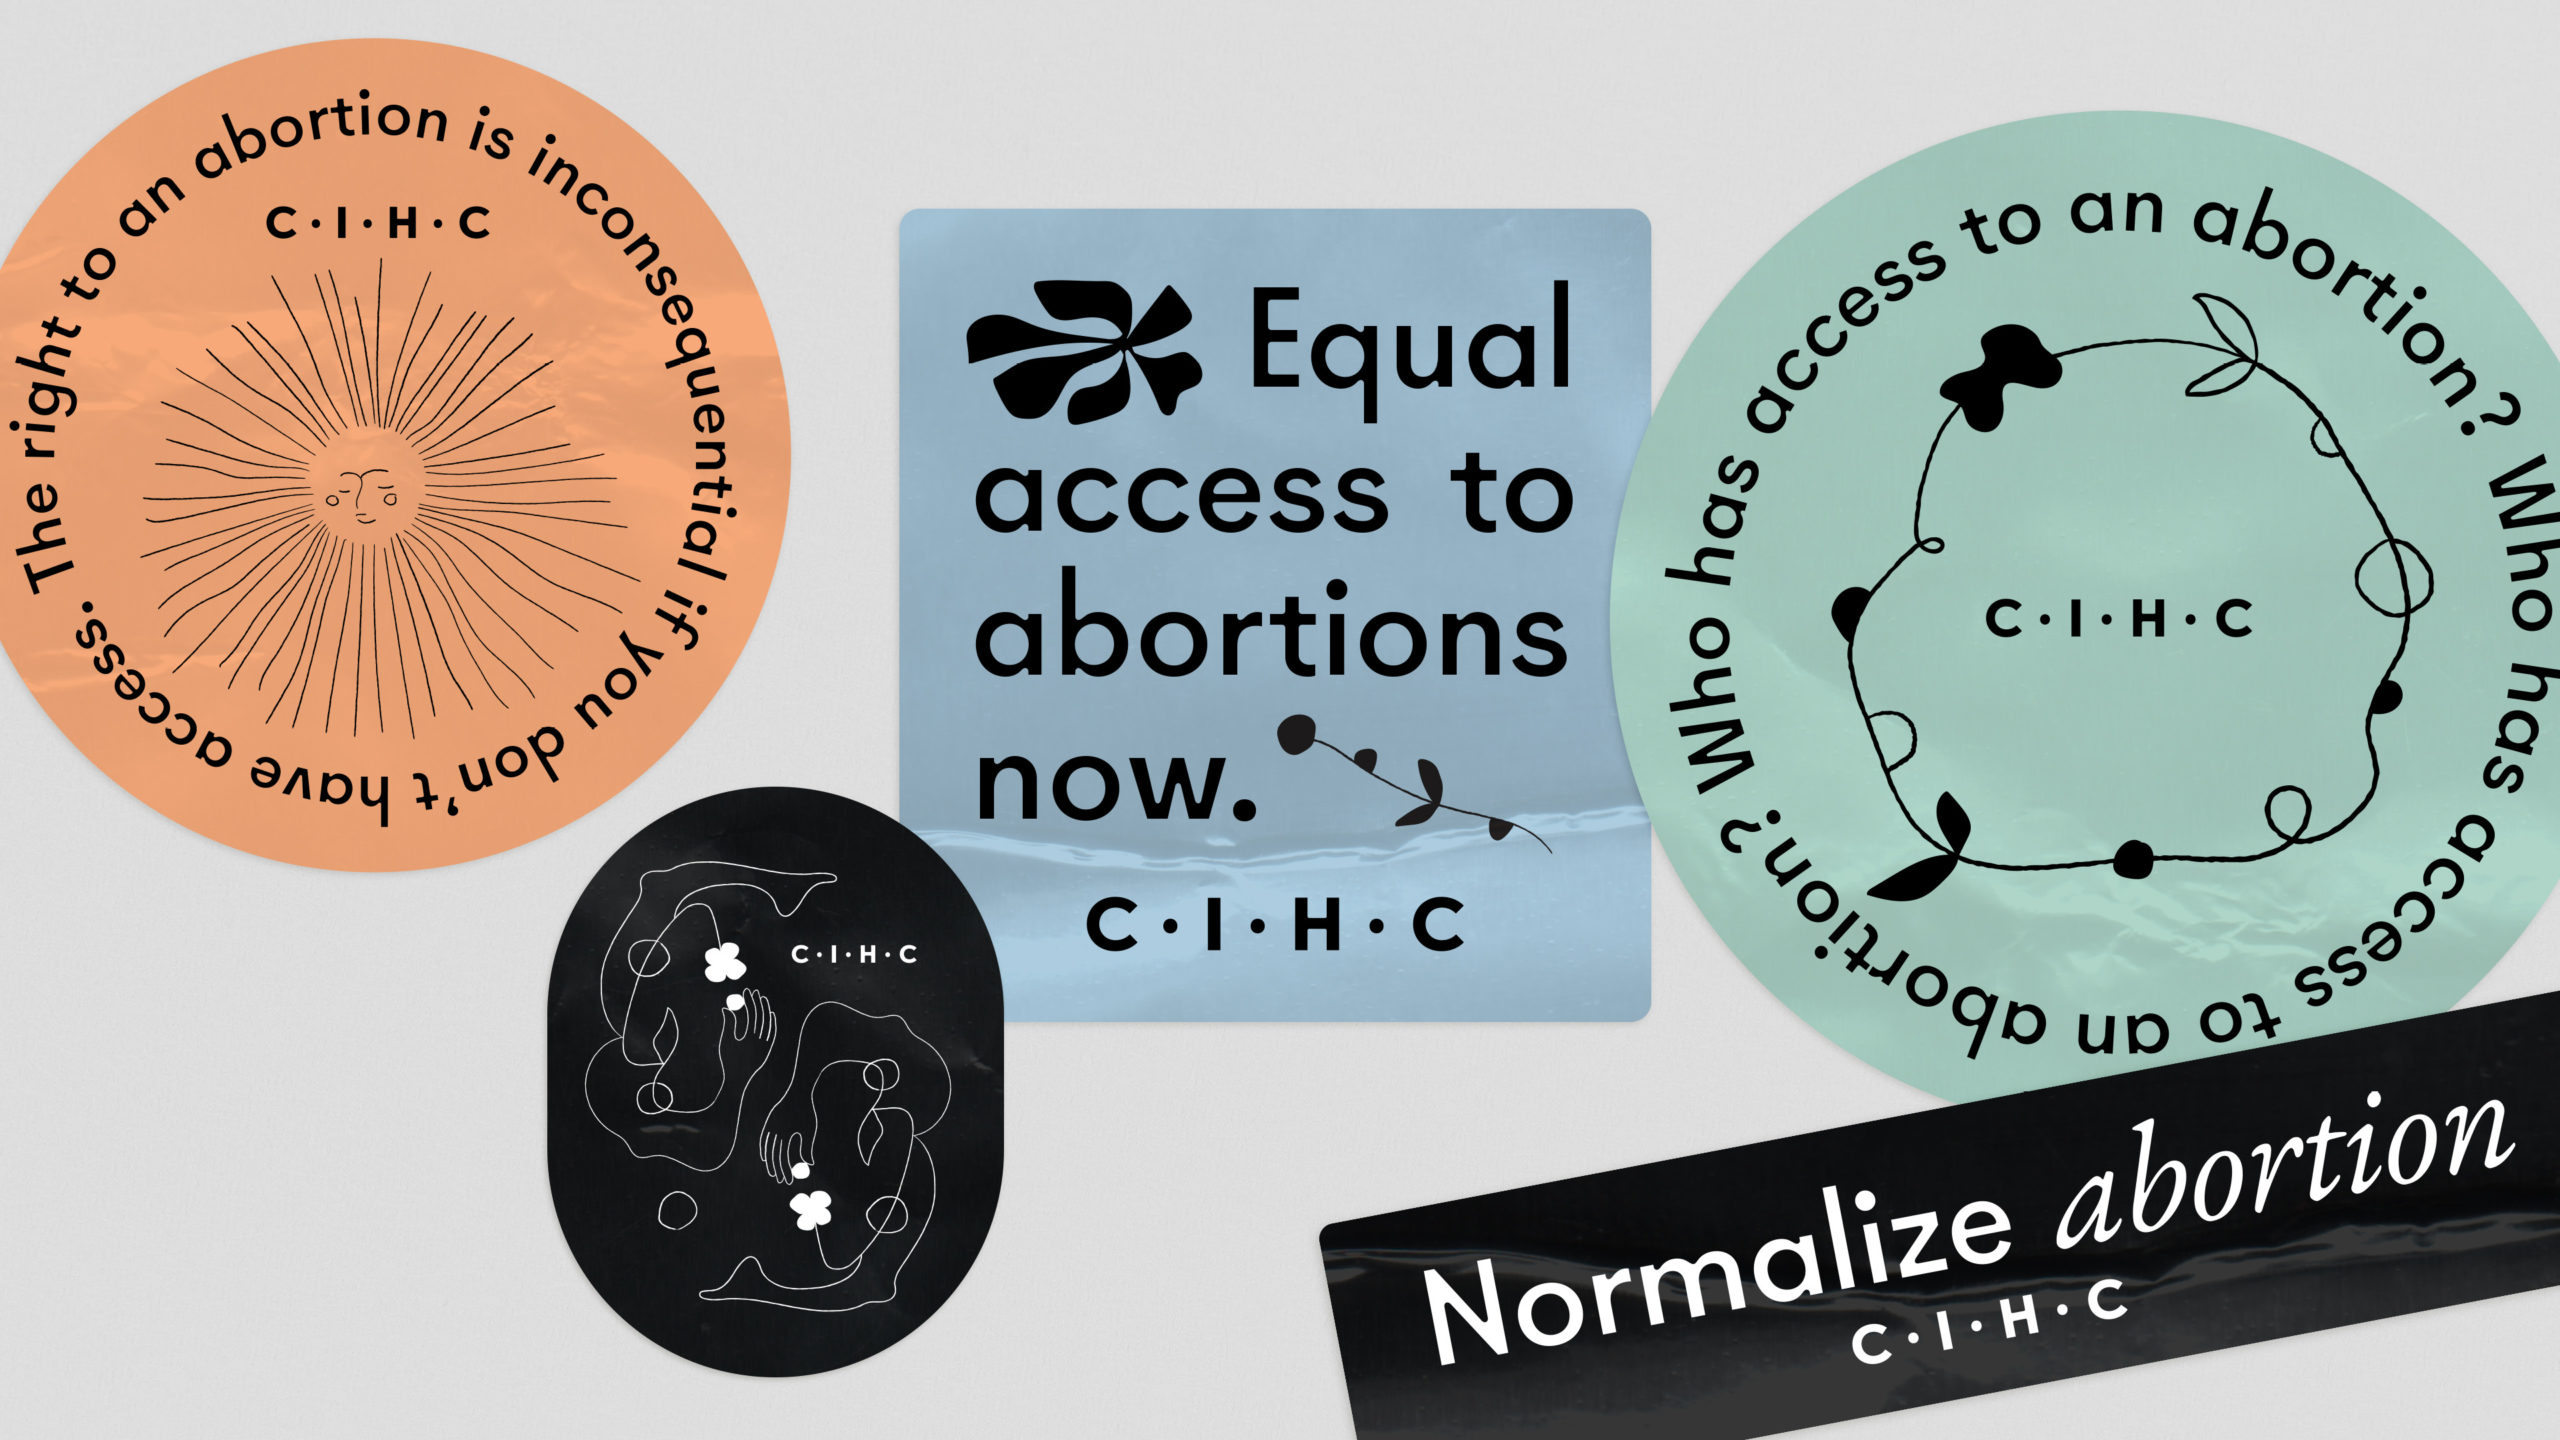 Choice in Health Clinic: Normalize Abortion